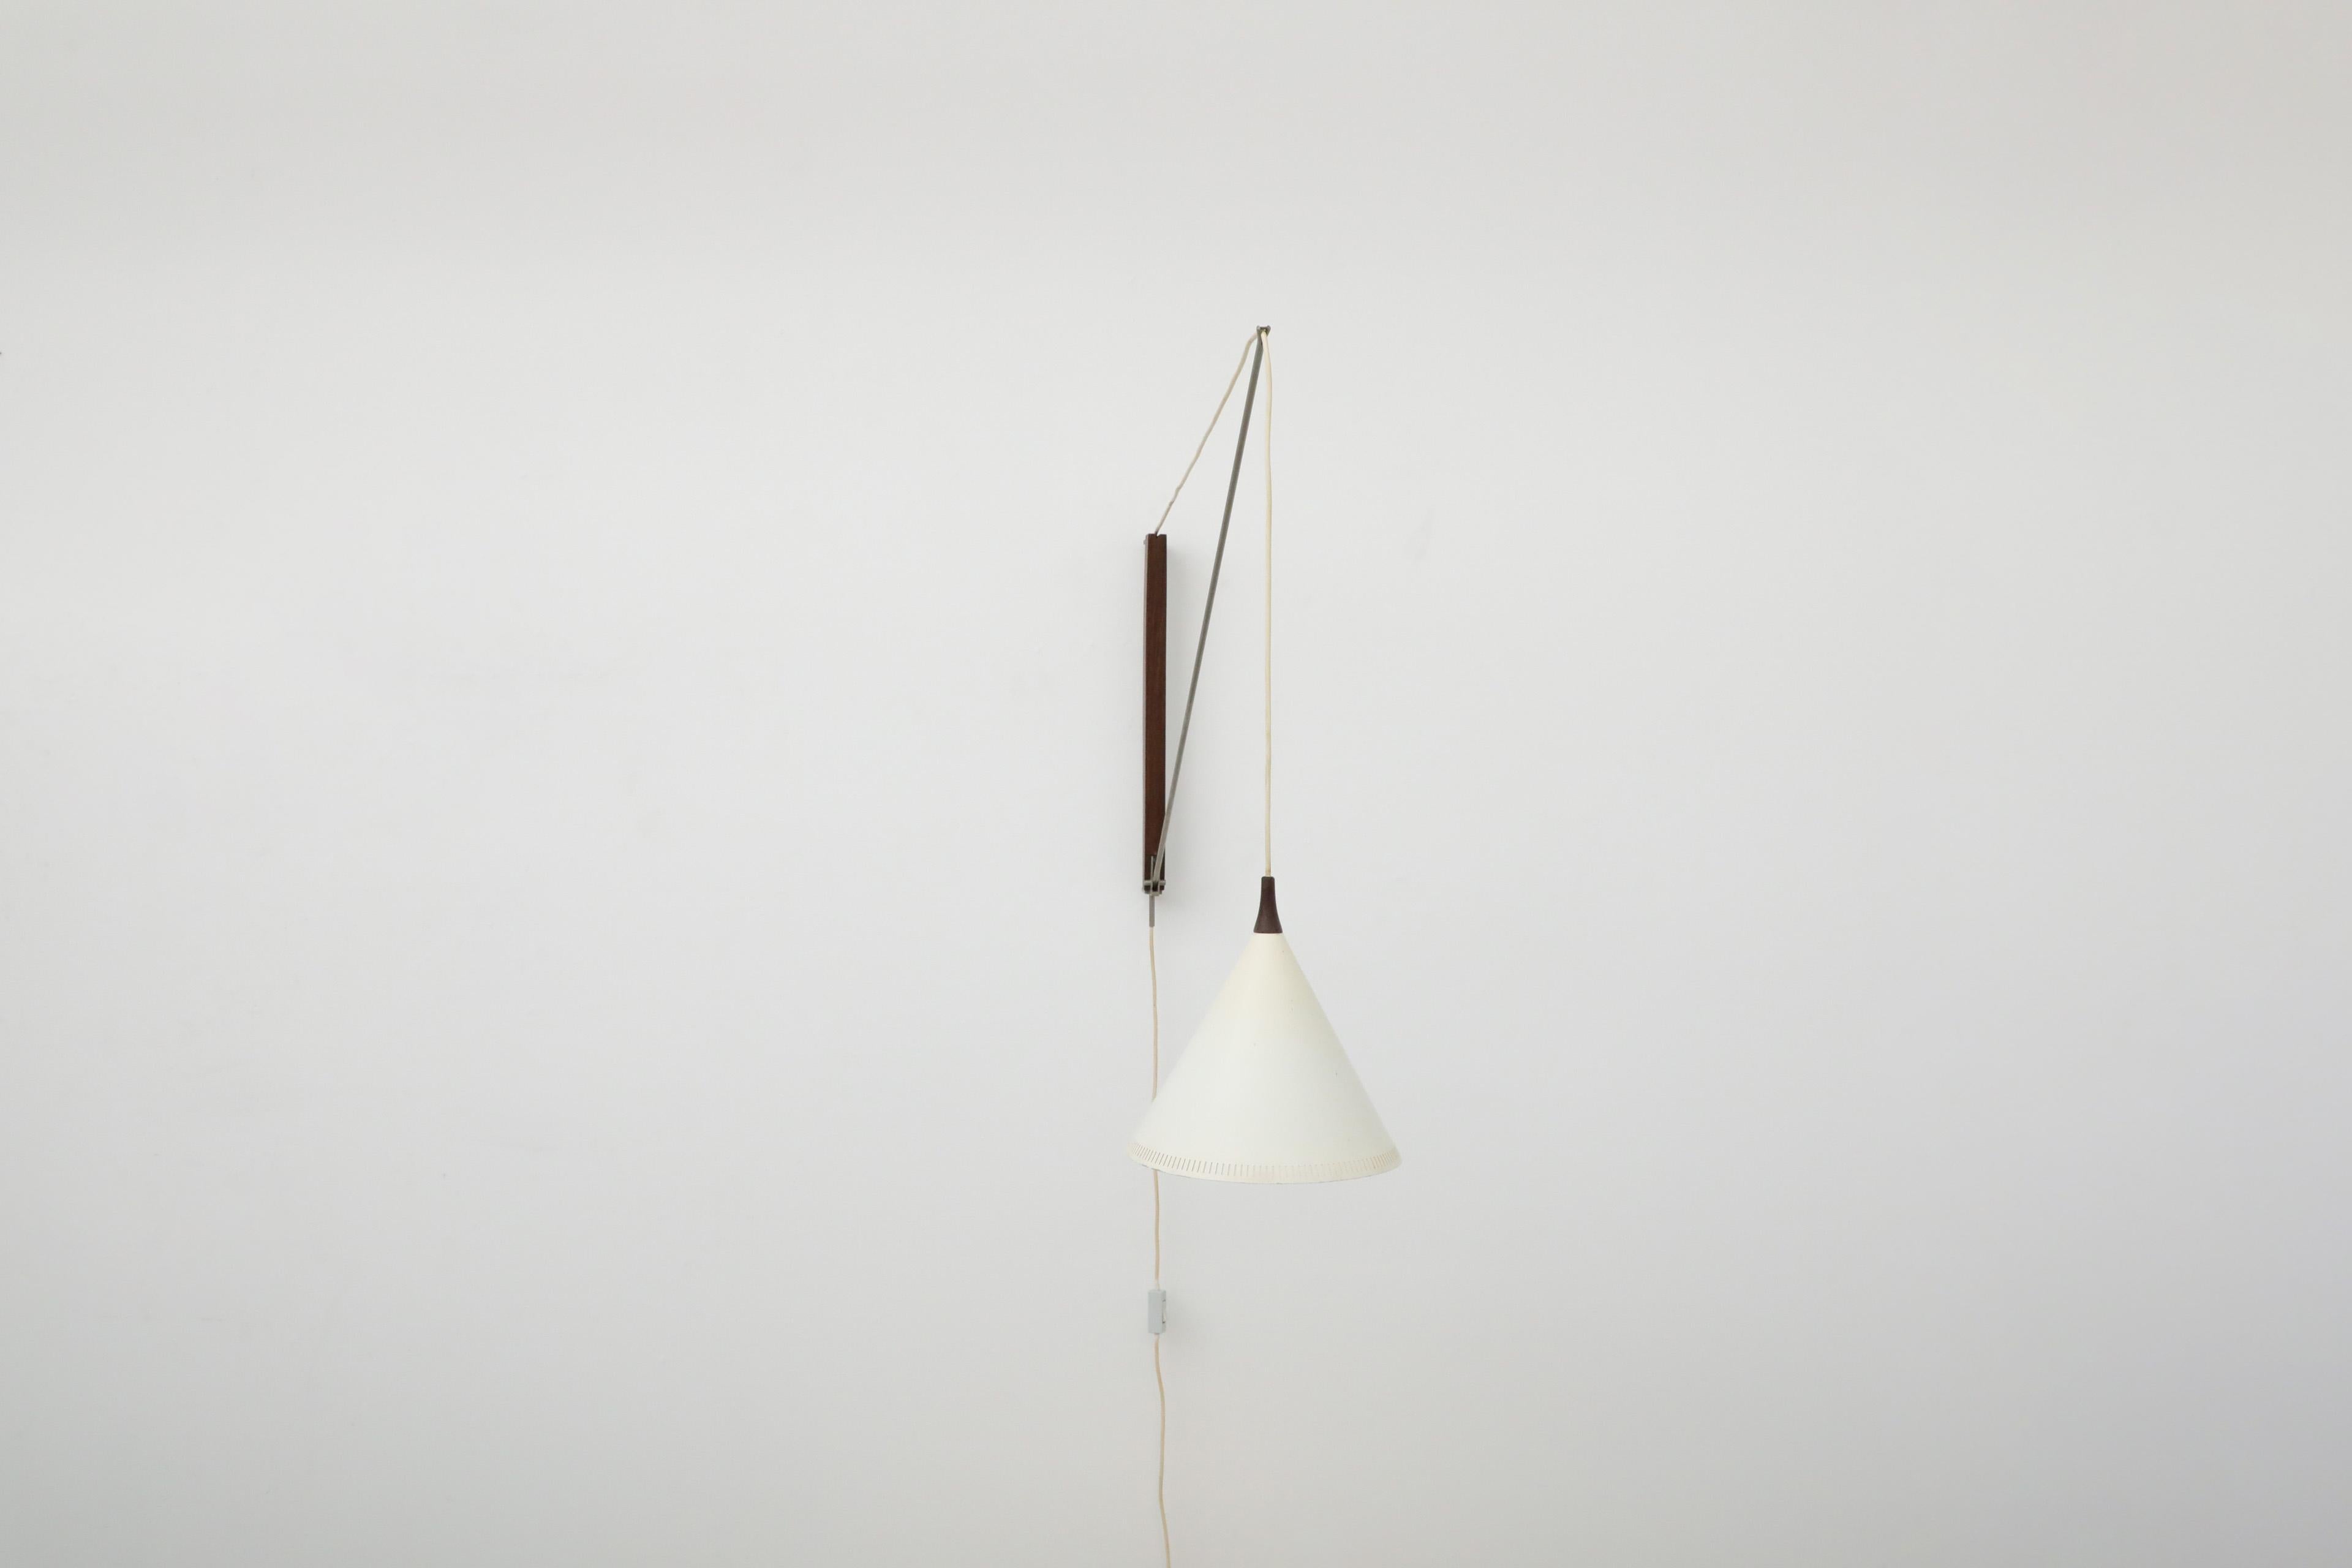 Beautiful Willem Hagoort wall sconce with white enameled metal cone shade on steel stem and teak wall mount and accent. This incredibly constructed light swivels and can be raised or lowered by adjusting its cord while providing an illuminating